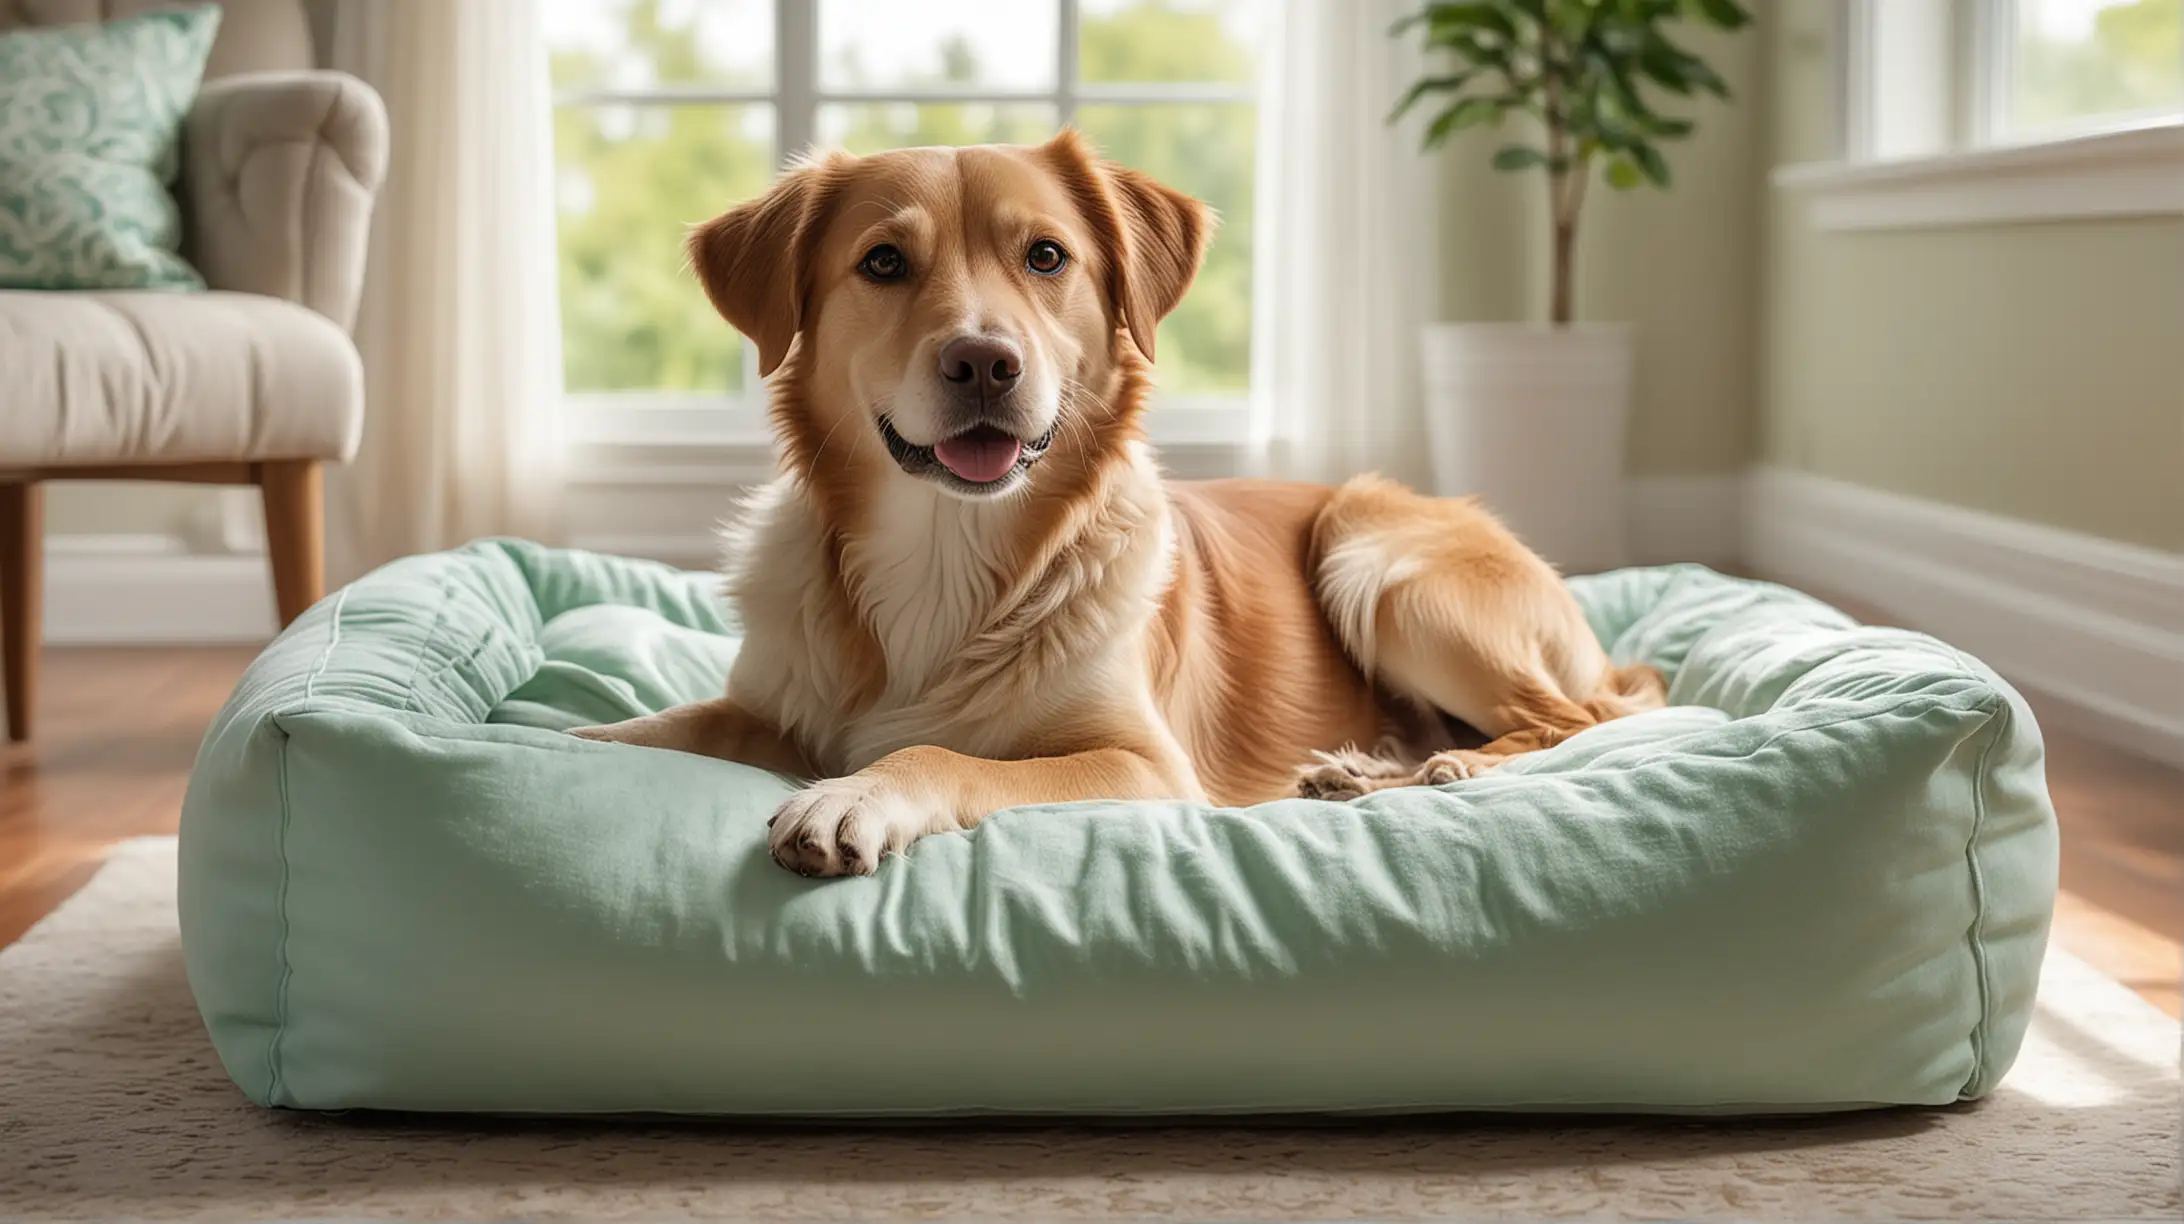 Happy Dog Relaxing on Dog Bed in Luxurious Home Setting